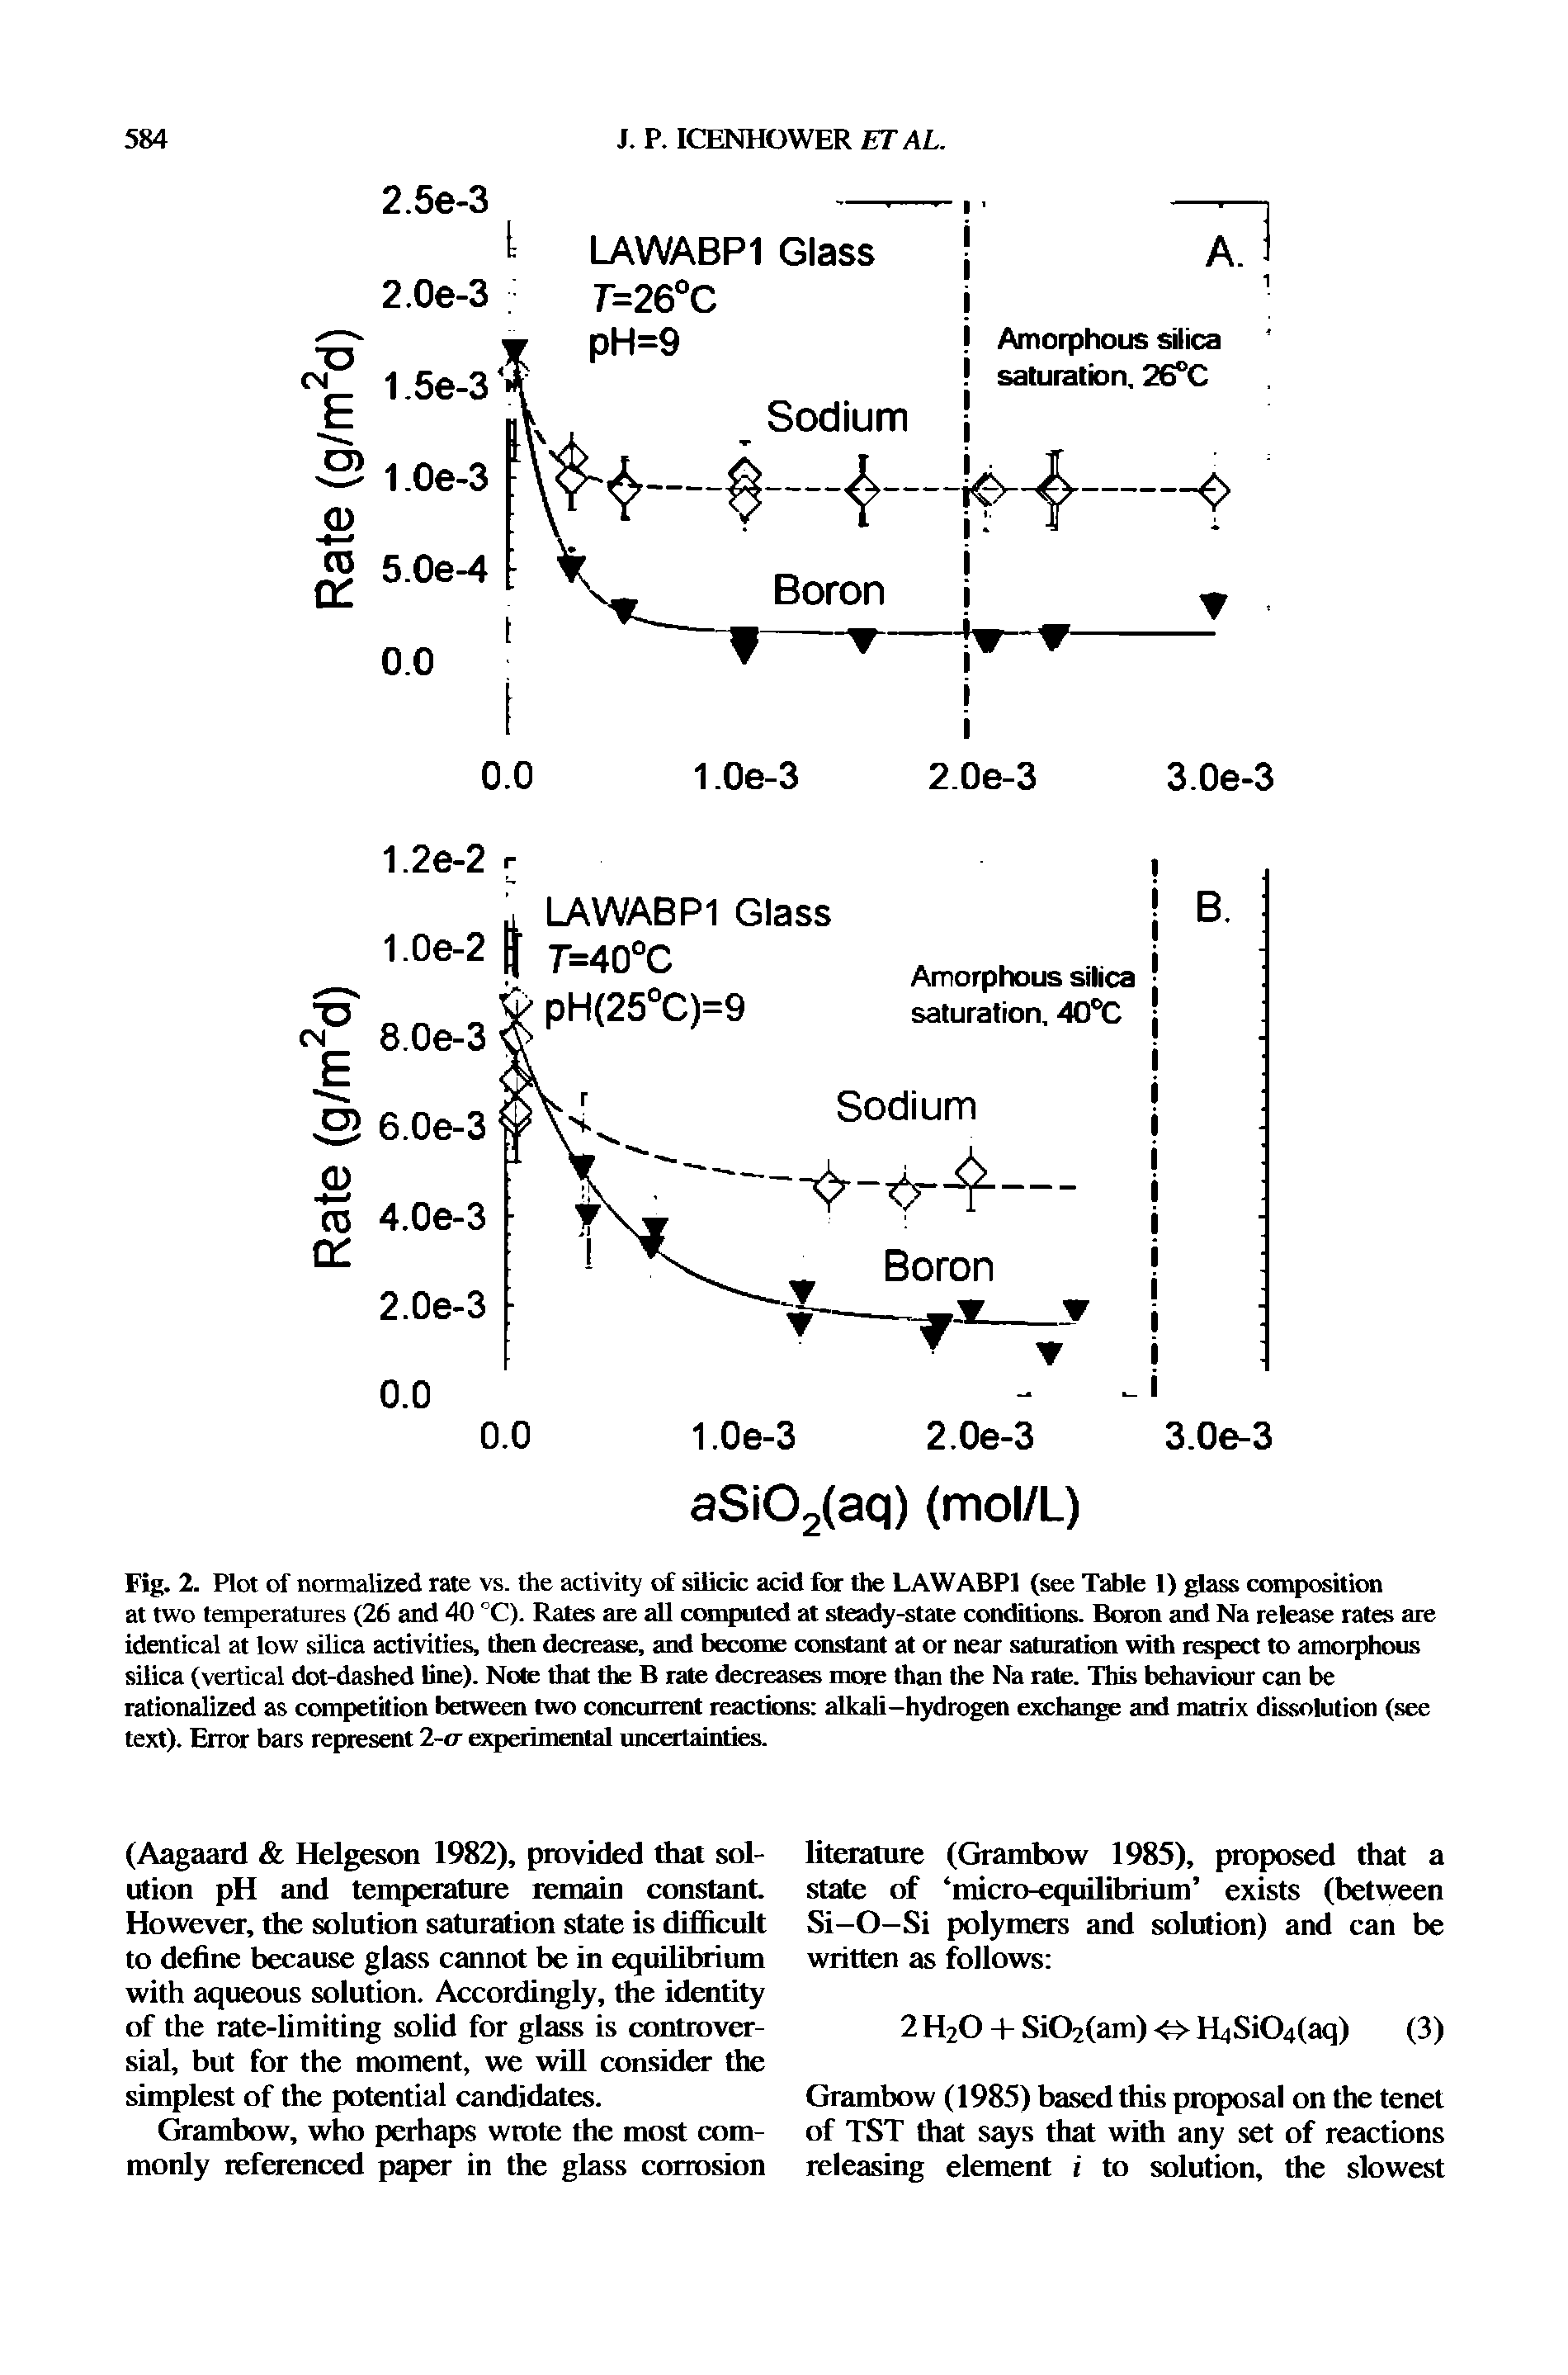 Fig. 2. Plot of normalized rate vs. the activity of silicic acid for the LAWABP1 (see Table 1) glass composition at two temperatures (26 and 40 °C). Rates are all computed at steady-state conditions. Boron and Na release rates are identical at low silica activities, then decrease, and become constant at or near saturation with respect to amorphous silica (vertical dot-dashed line). Note that the B rate decreases more than the Na rate. This behaviour can be rationalized as competition between two concurrent reactions alkali-hydrogen exchange and matrix dissolution (see text). Error bars represent 2-<r experimental uncertainties.